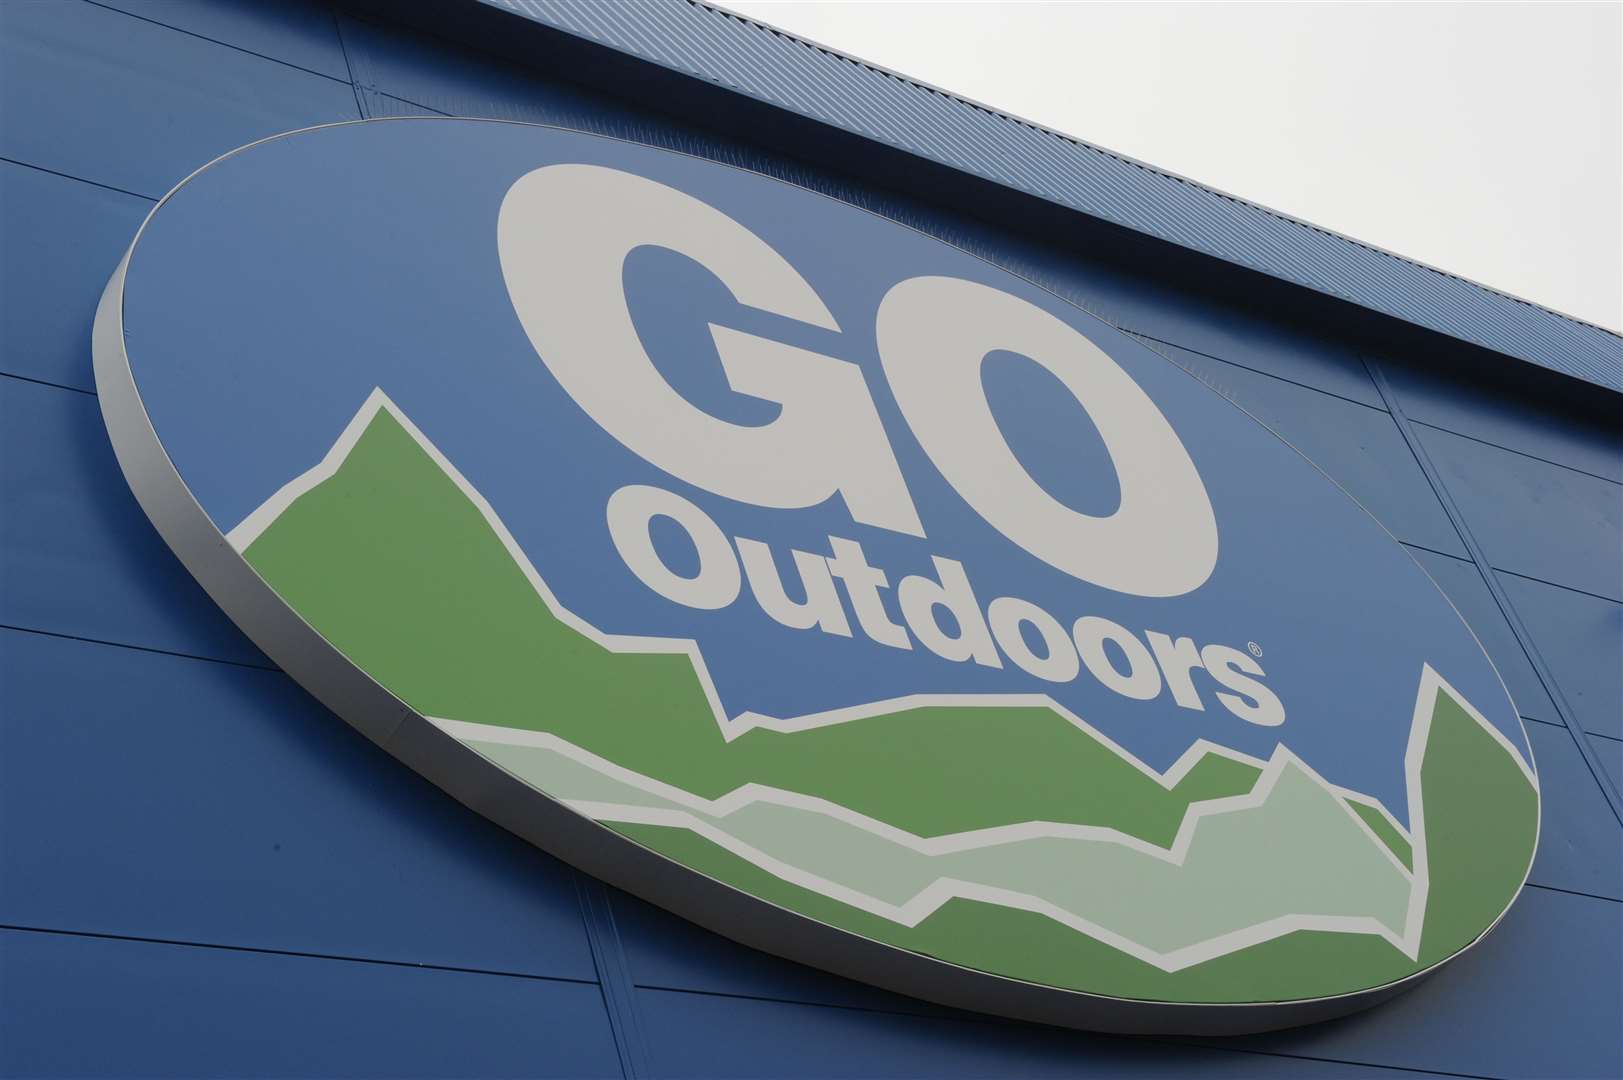 Go Outdoors is struggling to survive